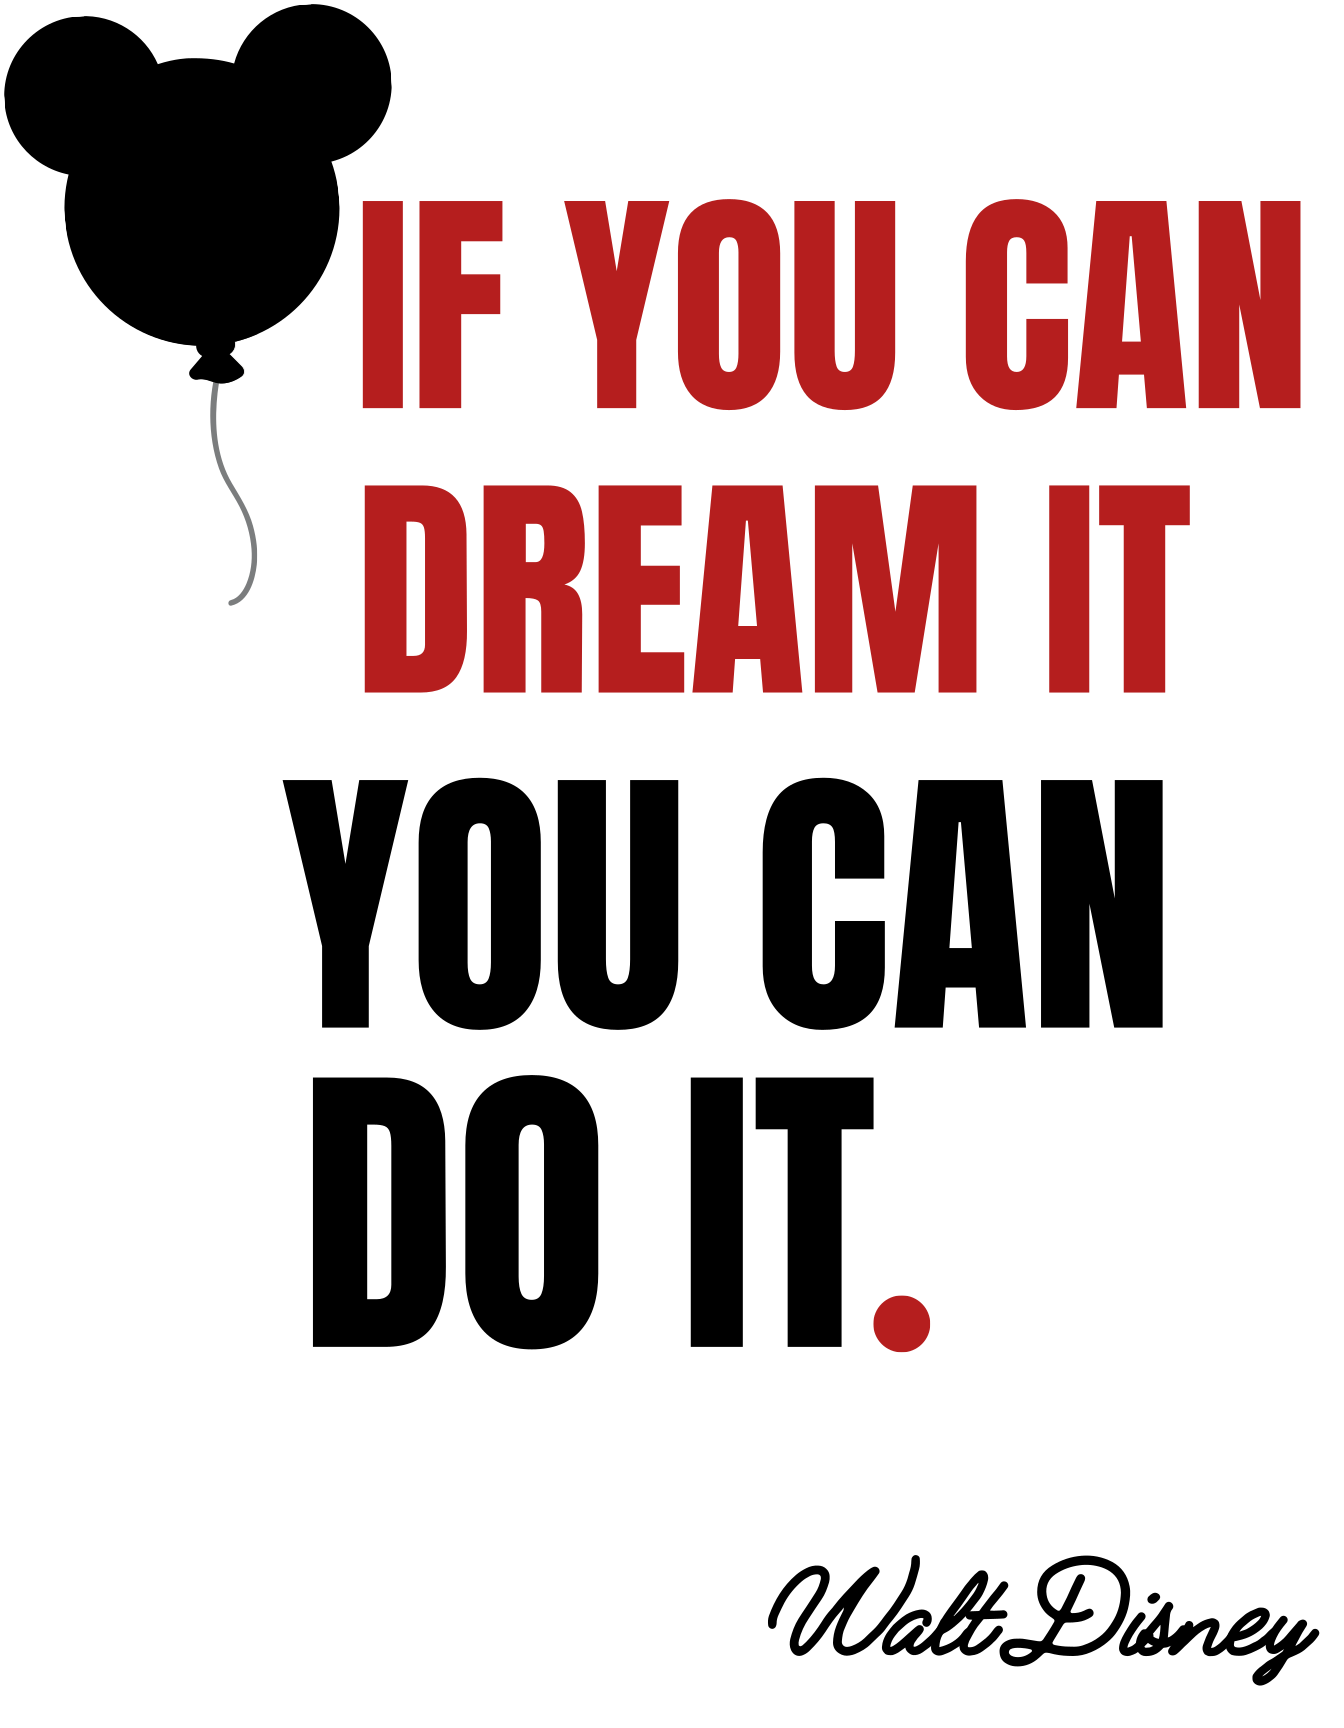 free walt disney quote SVG t shirt design "If you can dream it you can do it"